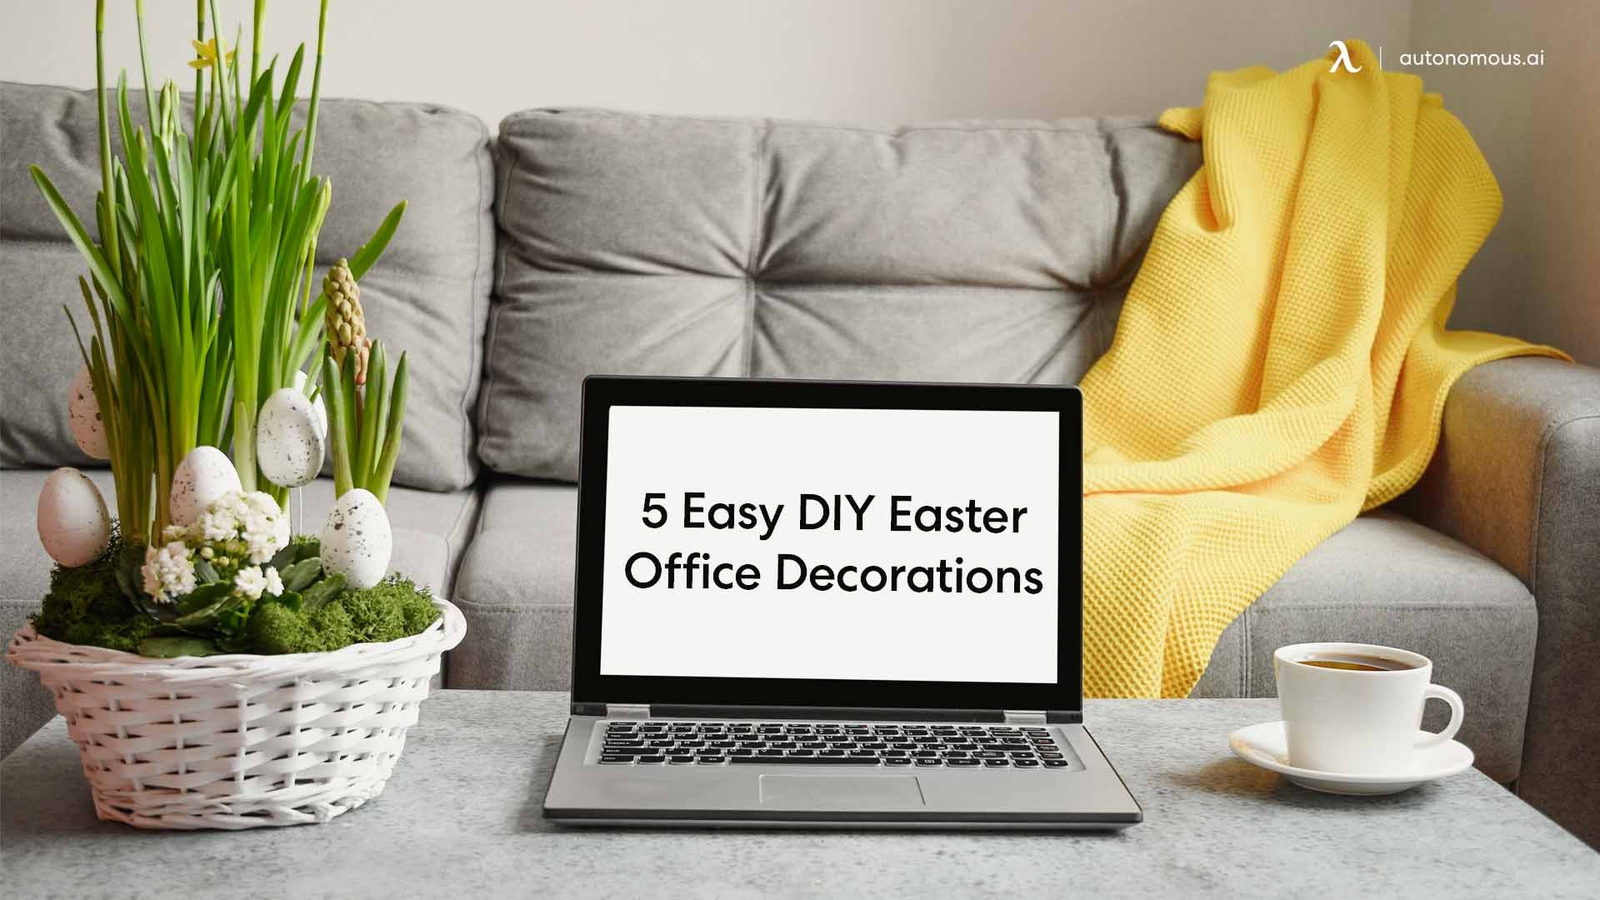 5 Easy DIY Easter Office Decorations